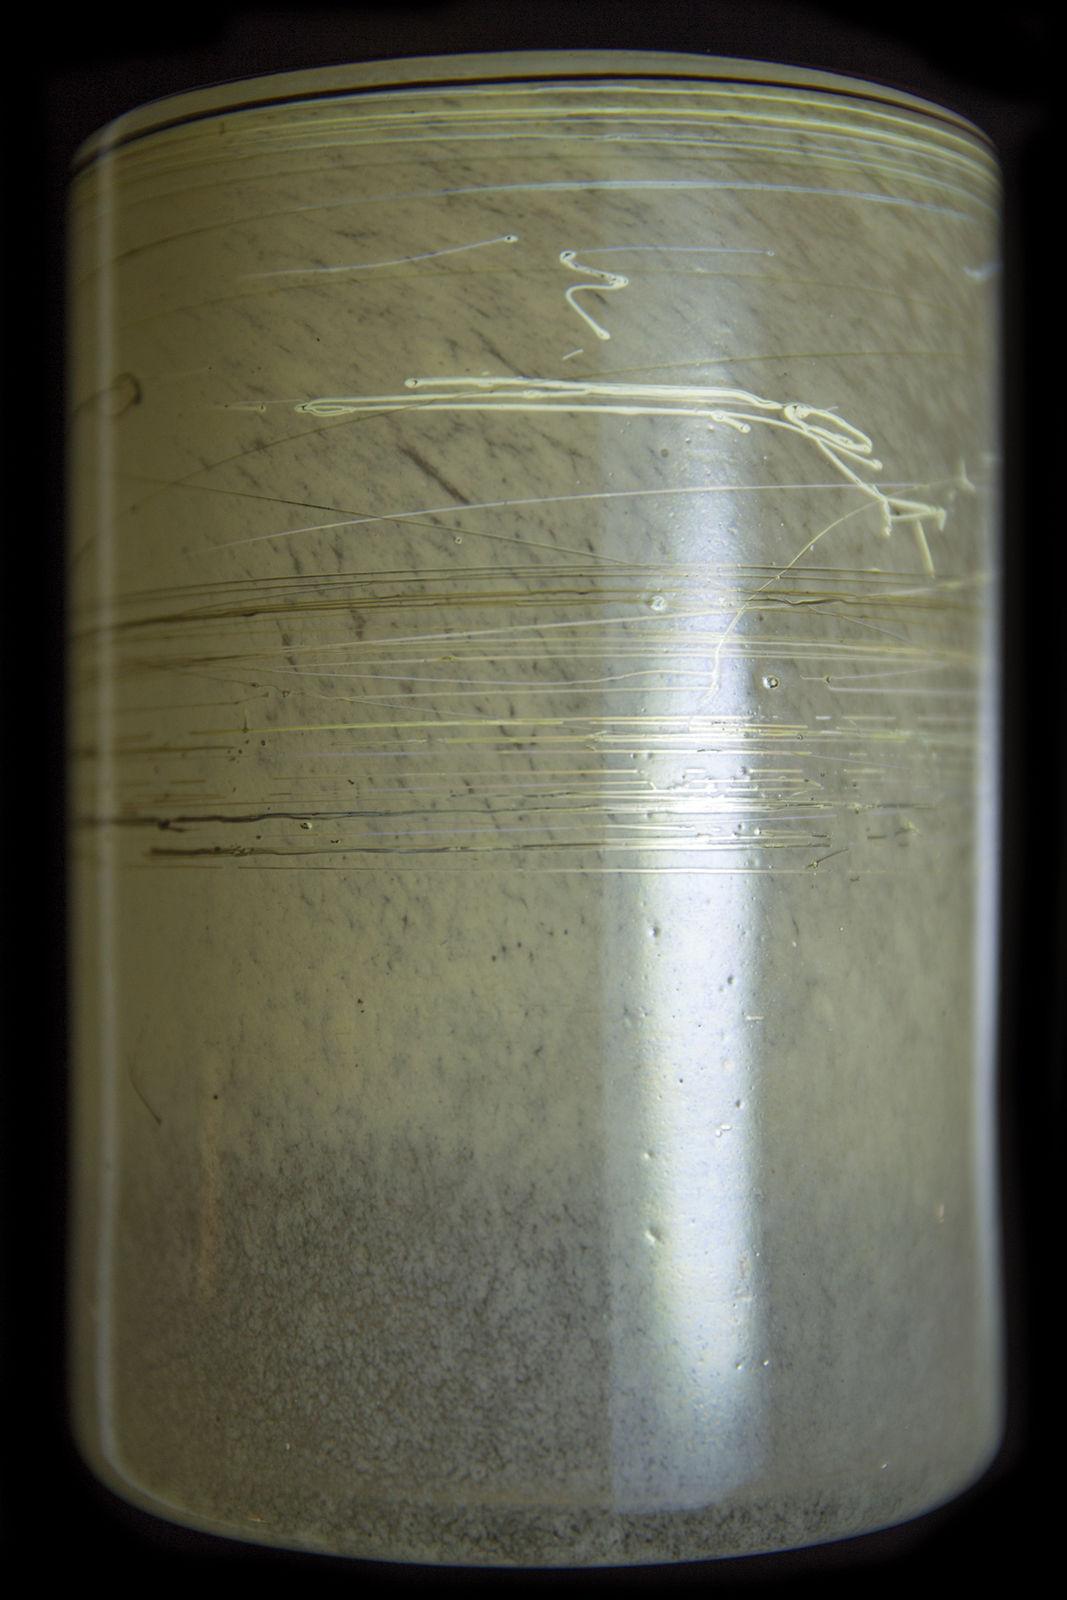 Dale Chihuly - Ivory Navajo Blanket Cylinder Studio
Blown glass vase
1979, Engraved signature and date at the bottom
Signed and dated
Approx. 6 ⅞ inches H
Mint condition. No chips, cracks or repairs.
Includes Protective Display Case
 
 
It’s not a